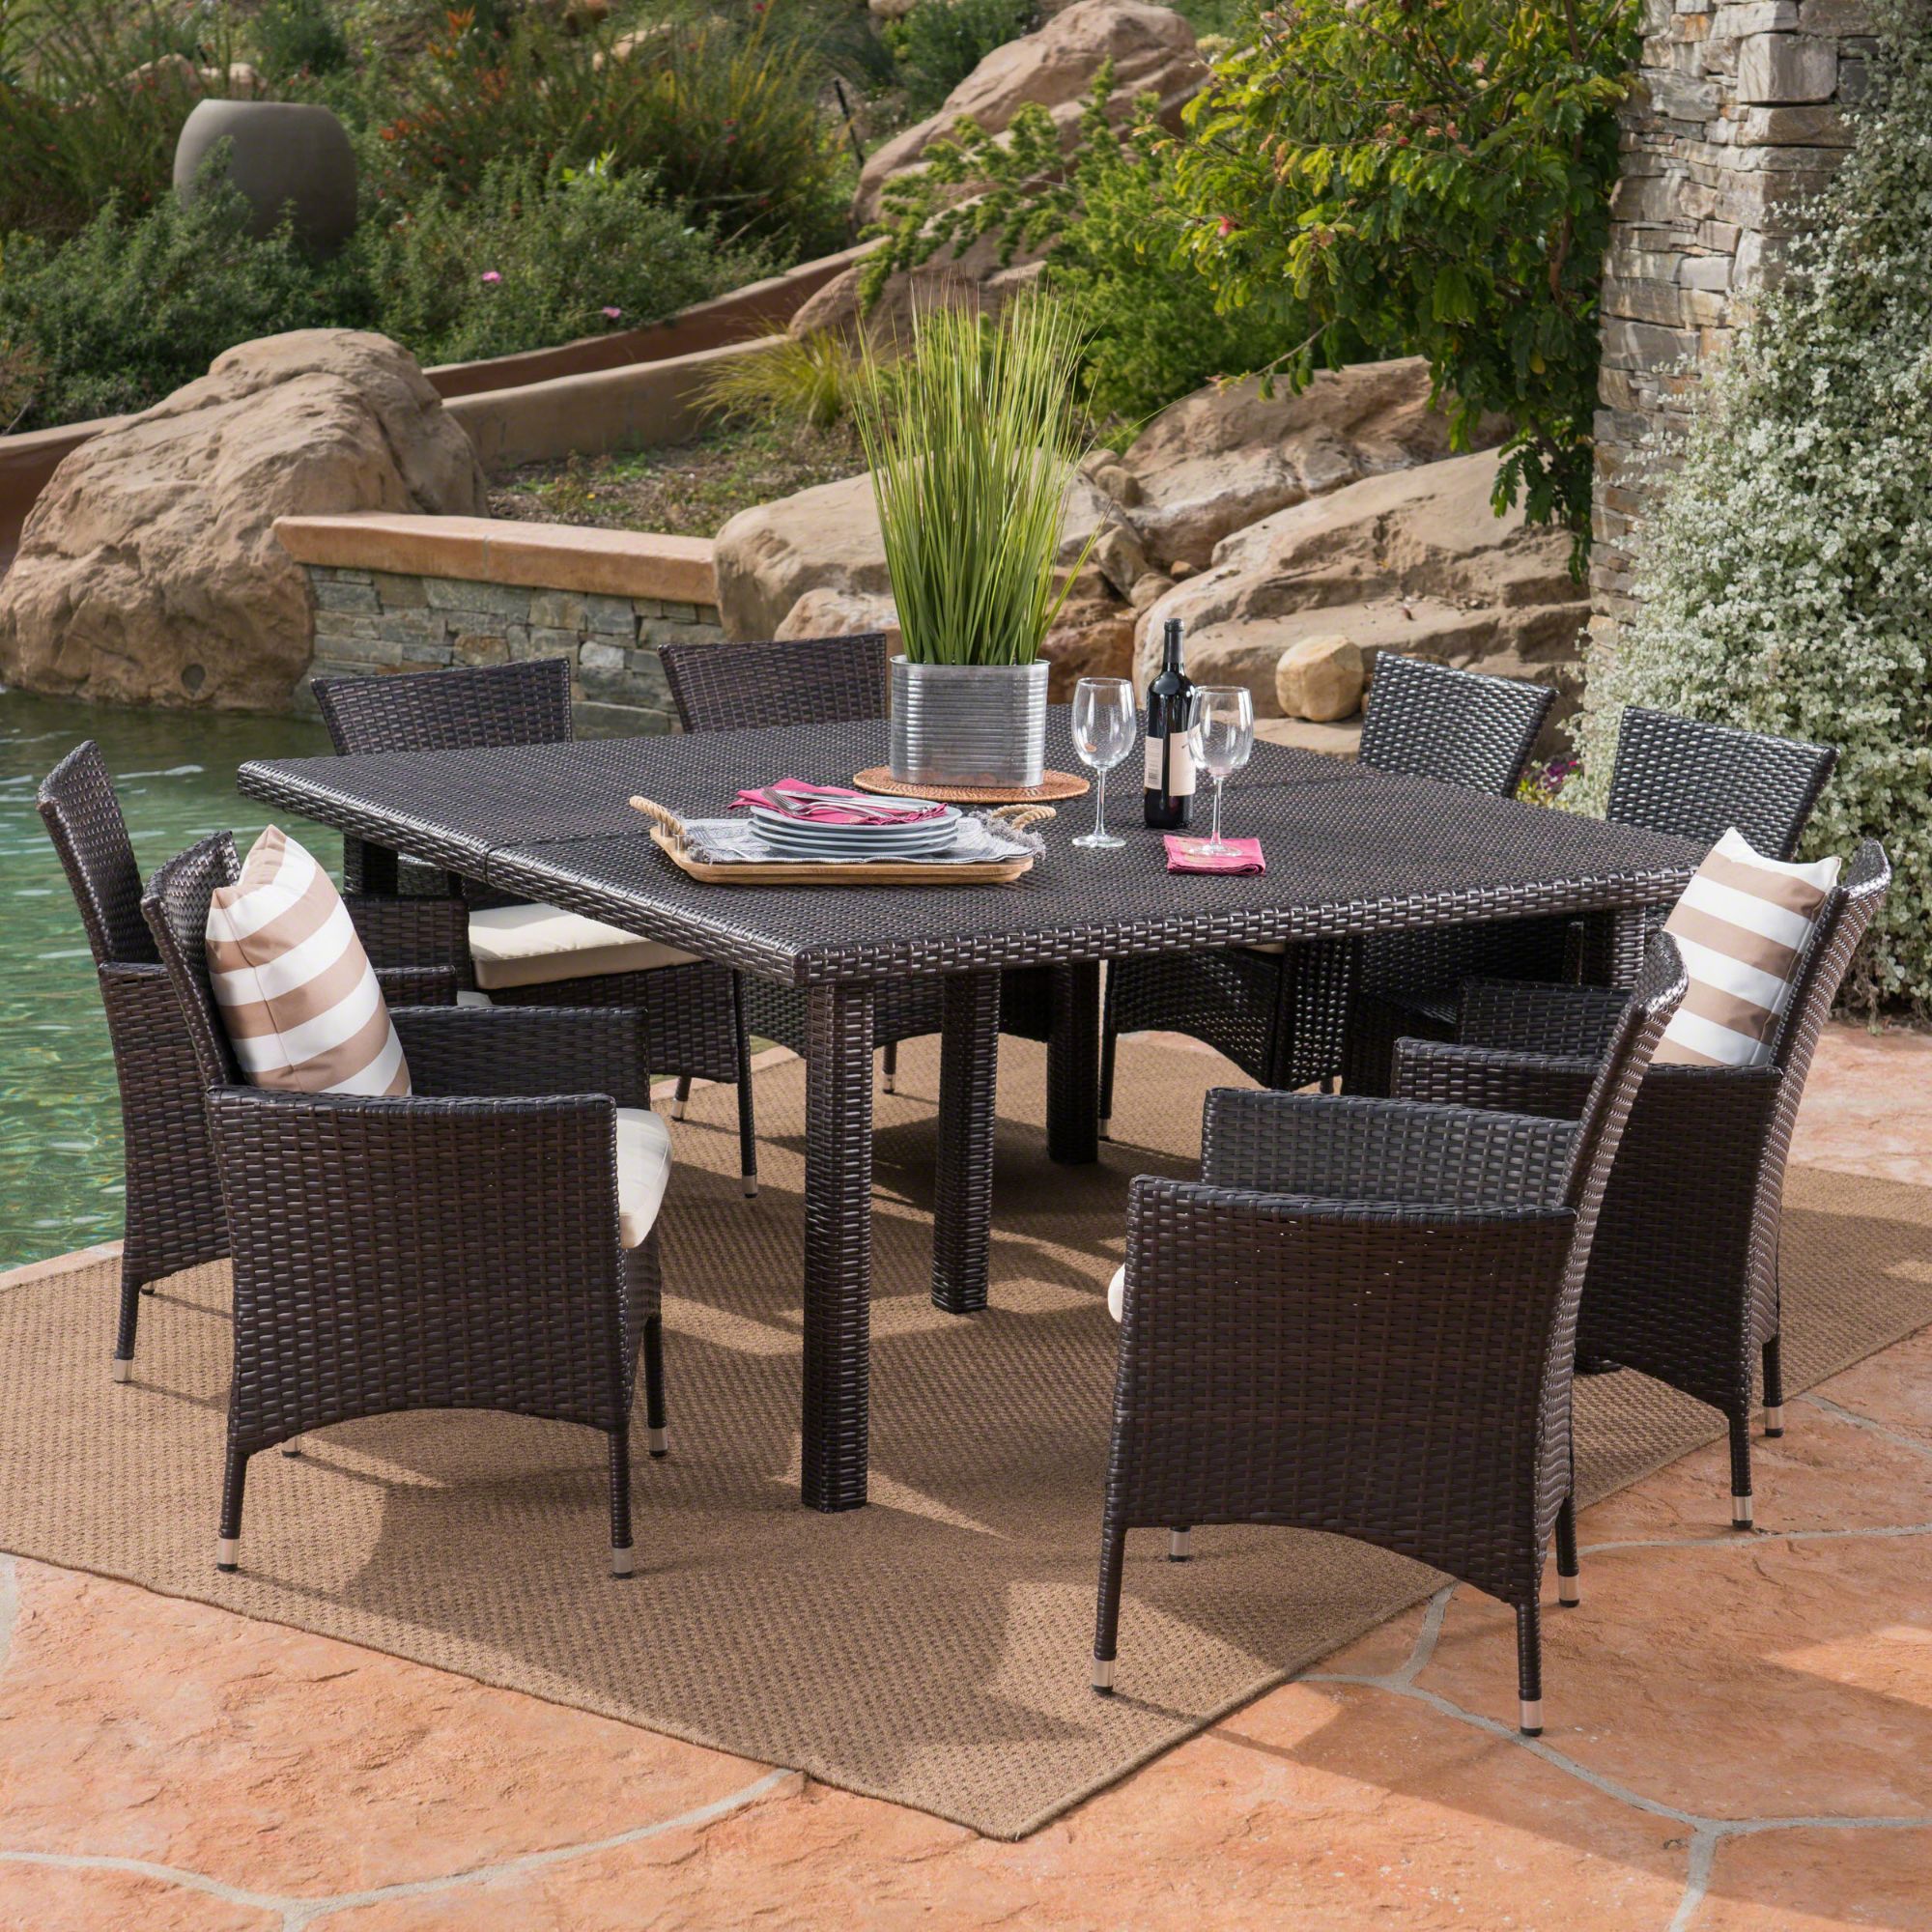 9 Piece Brown Finish Square Wicker Outdoor Furniture Patio Dining Set Intended For Rattan Wicker Outdoor Seating Sets (View 7 of 15)